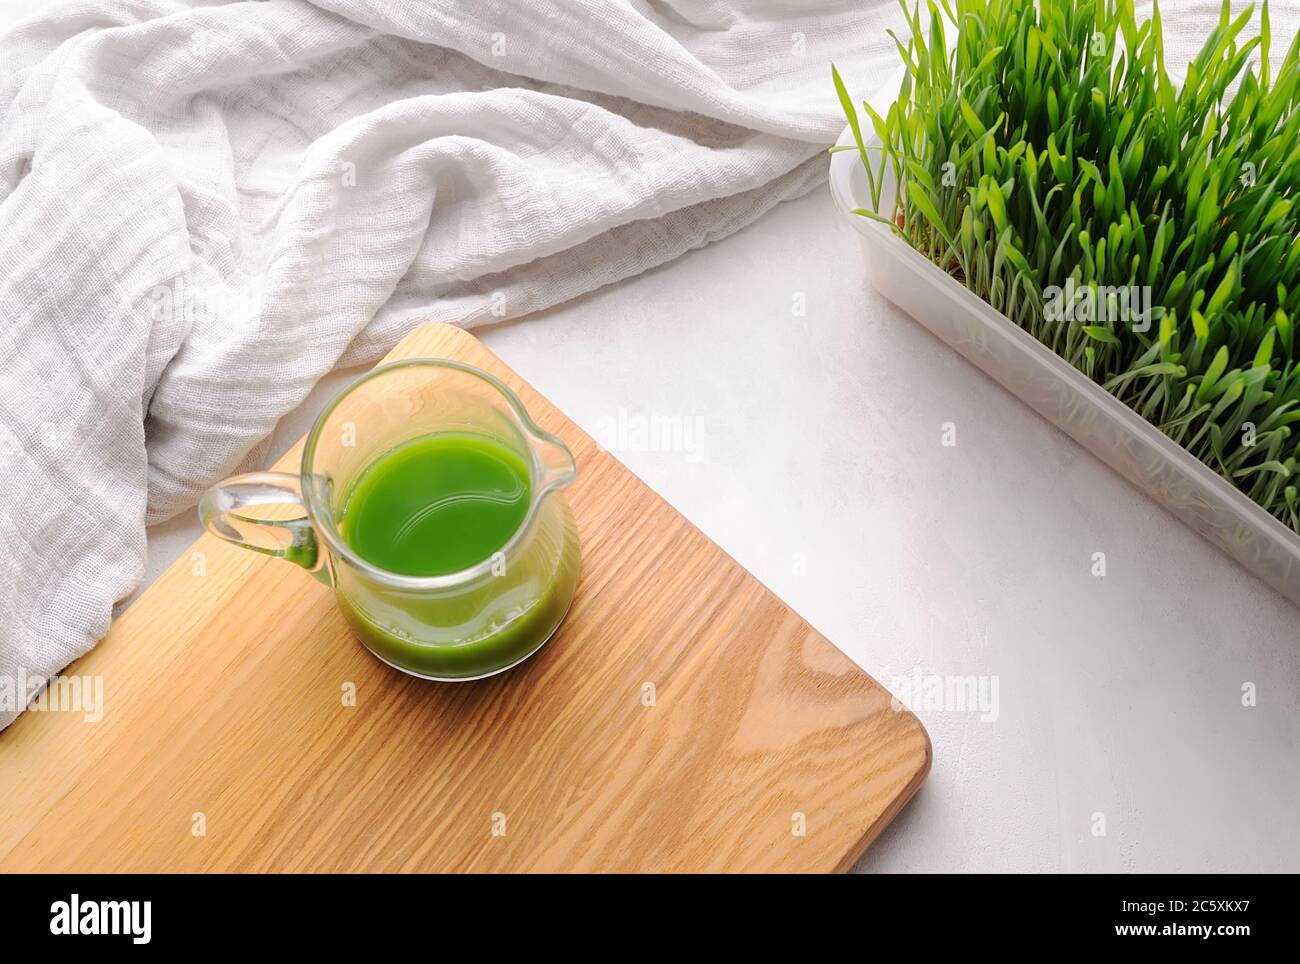 Wheat grass shot on the wooden board and wheat grass plant in the pot.Modern trend of health. Stock Photo